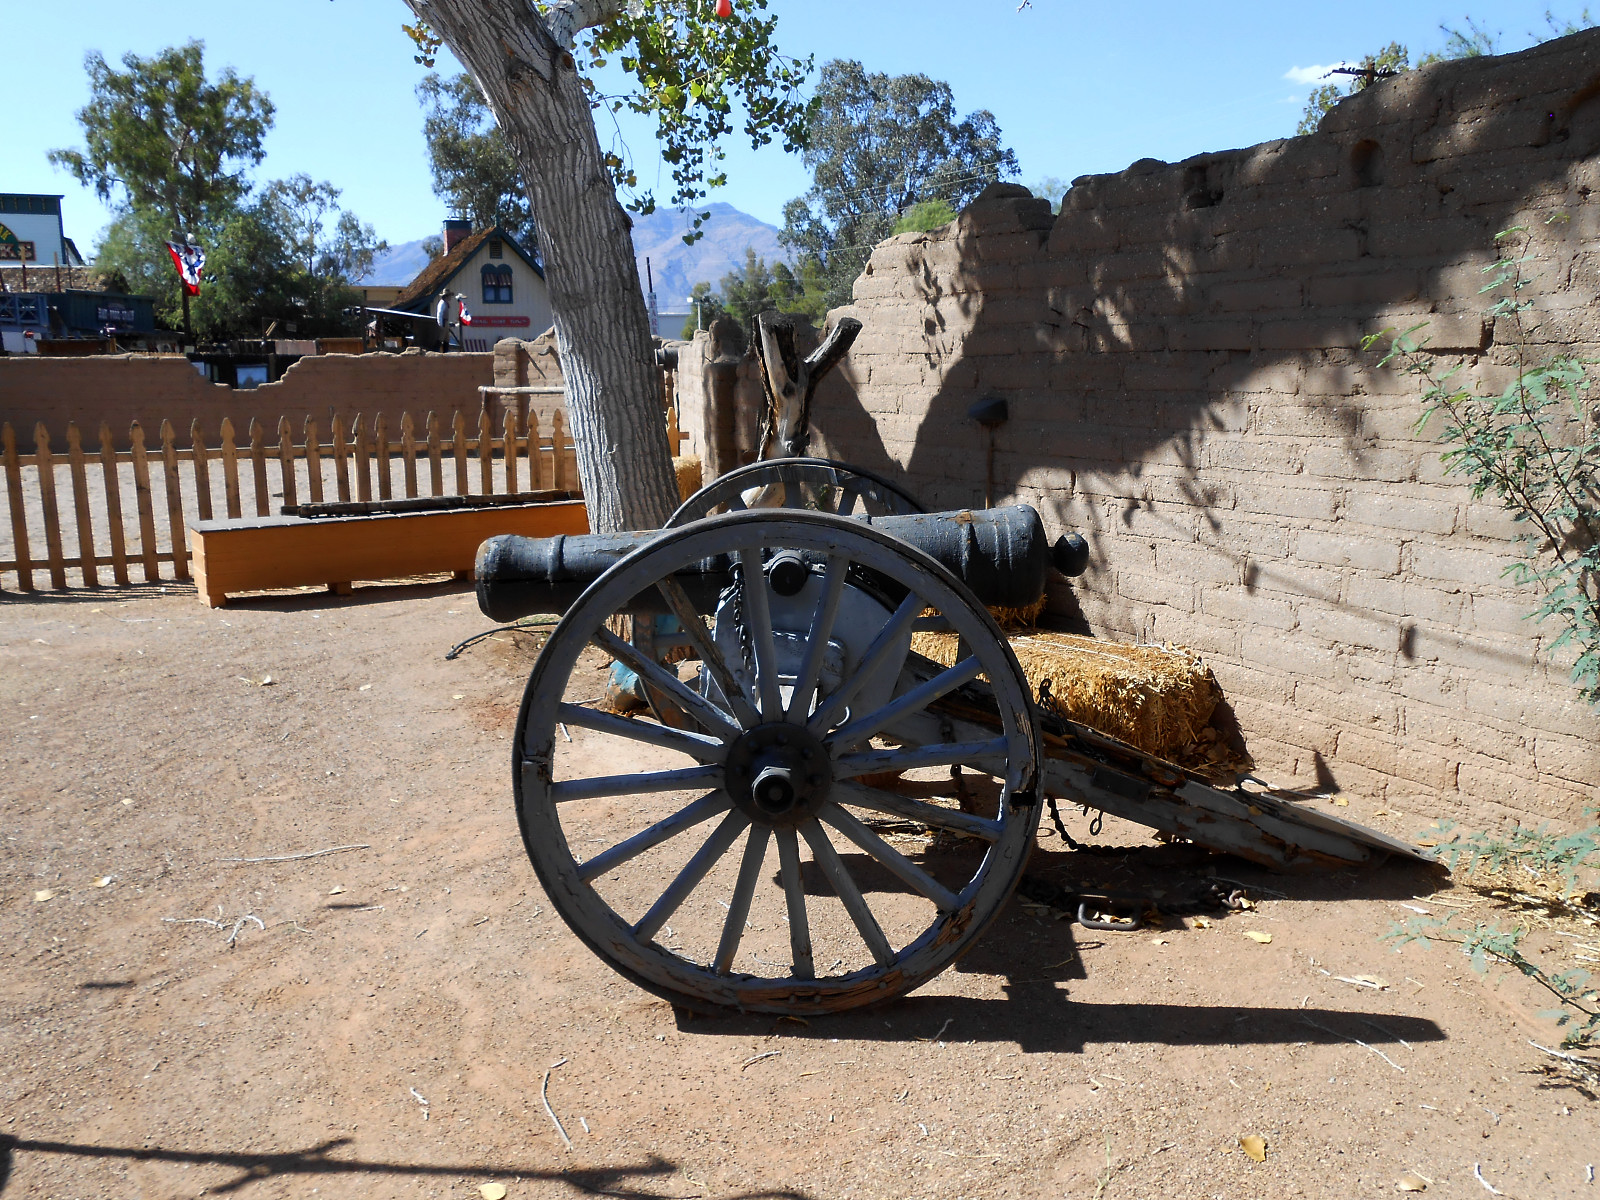 This Cannon was used in the film THE ALAMO starring John Wayne